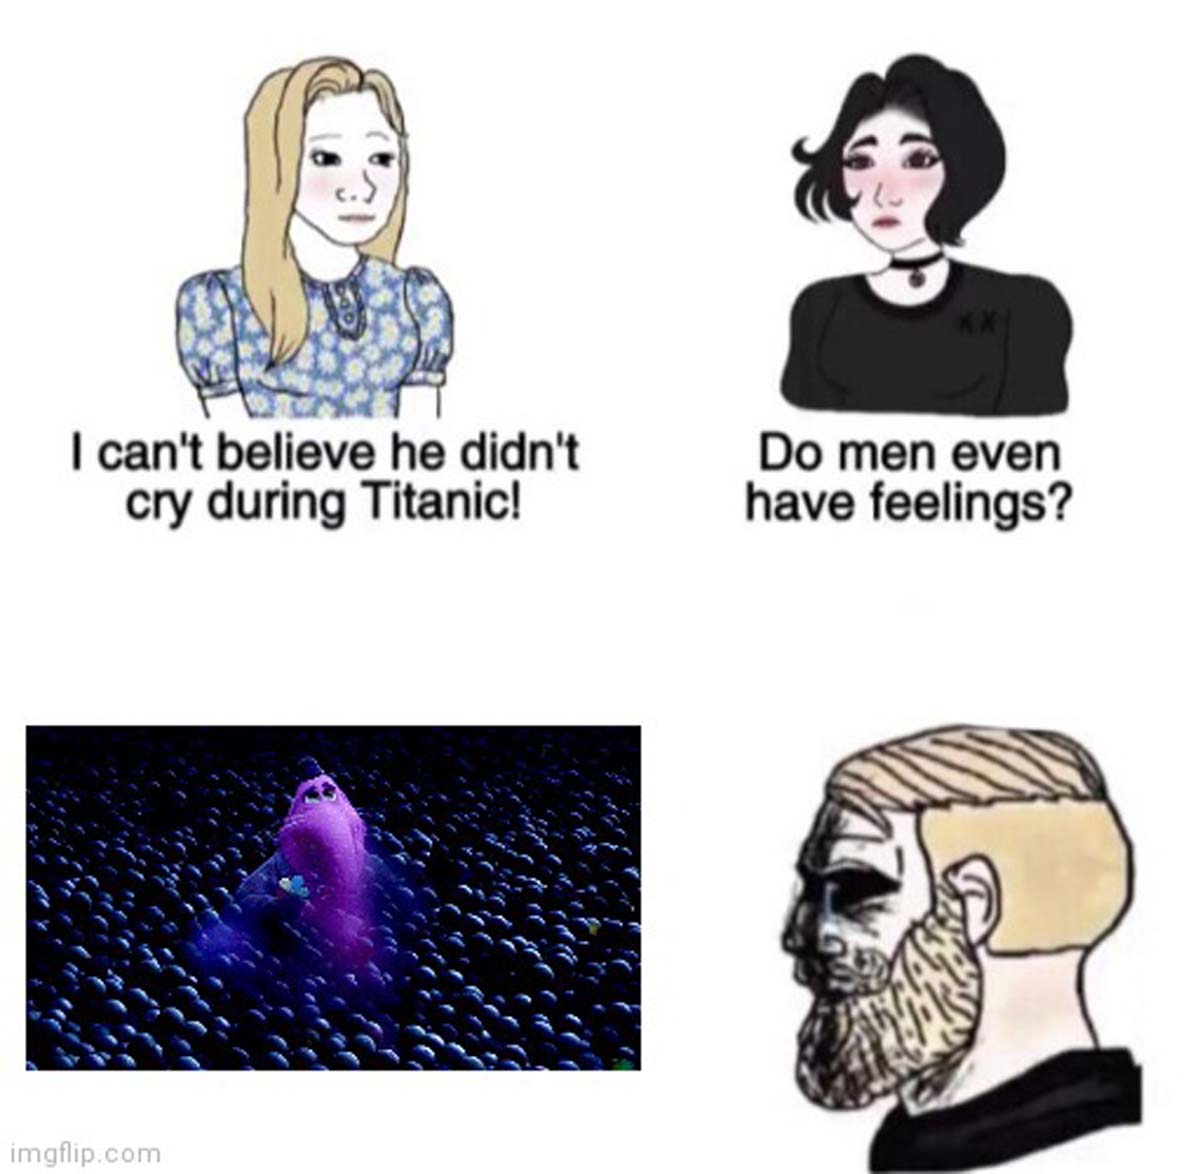 can t believe he didn t cry during titanic memes - I can't believe he didn't cry during Titanic! Do men even have feelings? imgflip.com